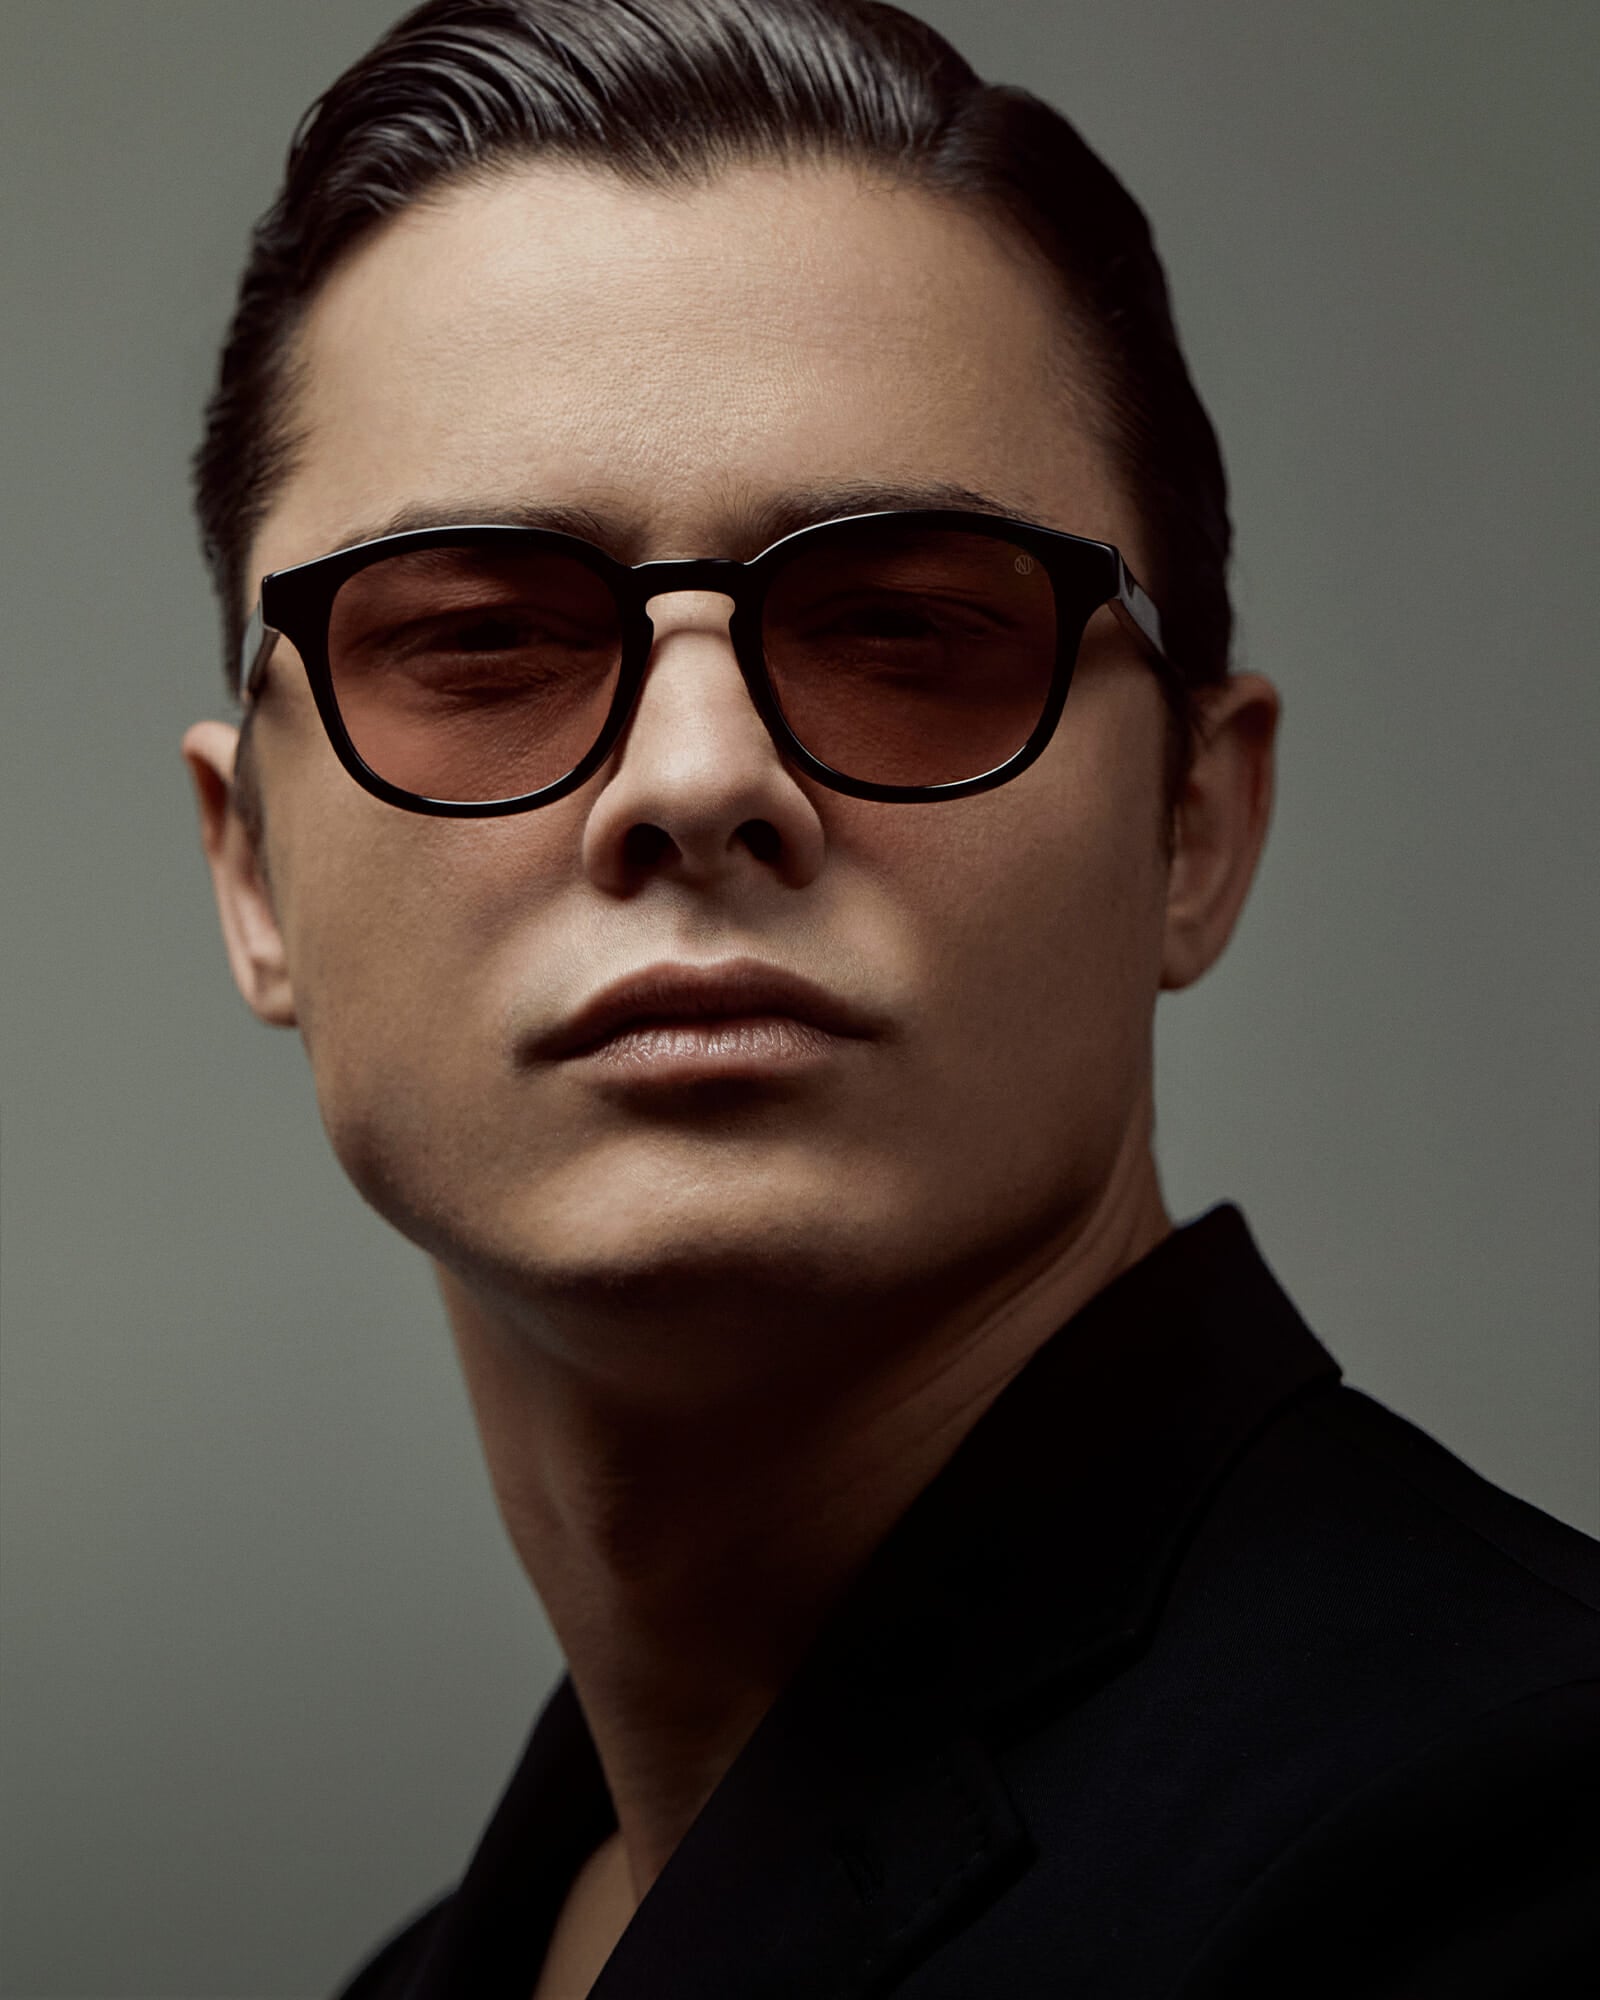 Portrait of a dark haired man who is wearing a black suit and black sunglasses. He is looking into the camera.